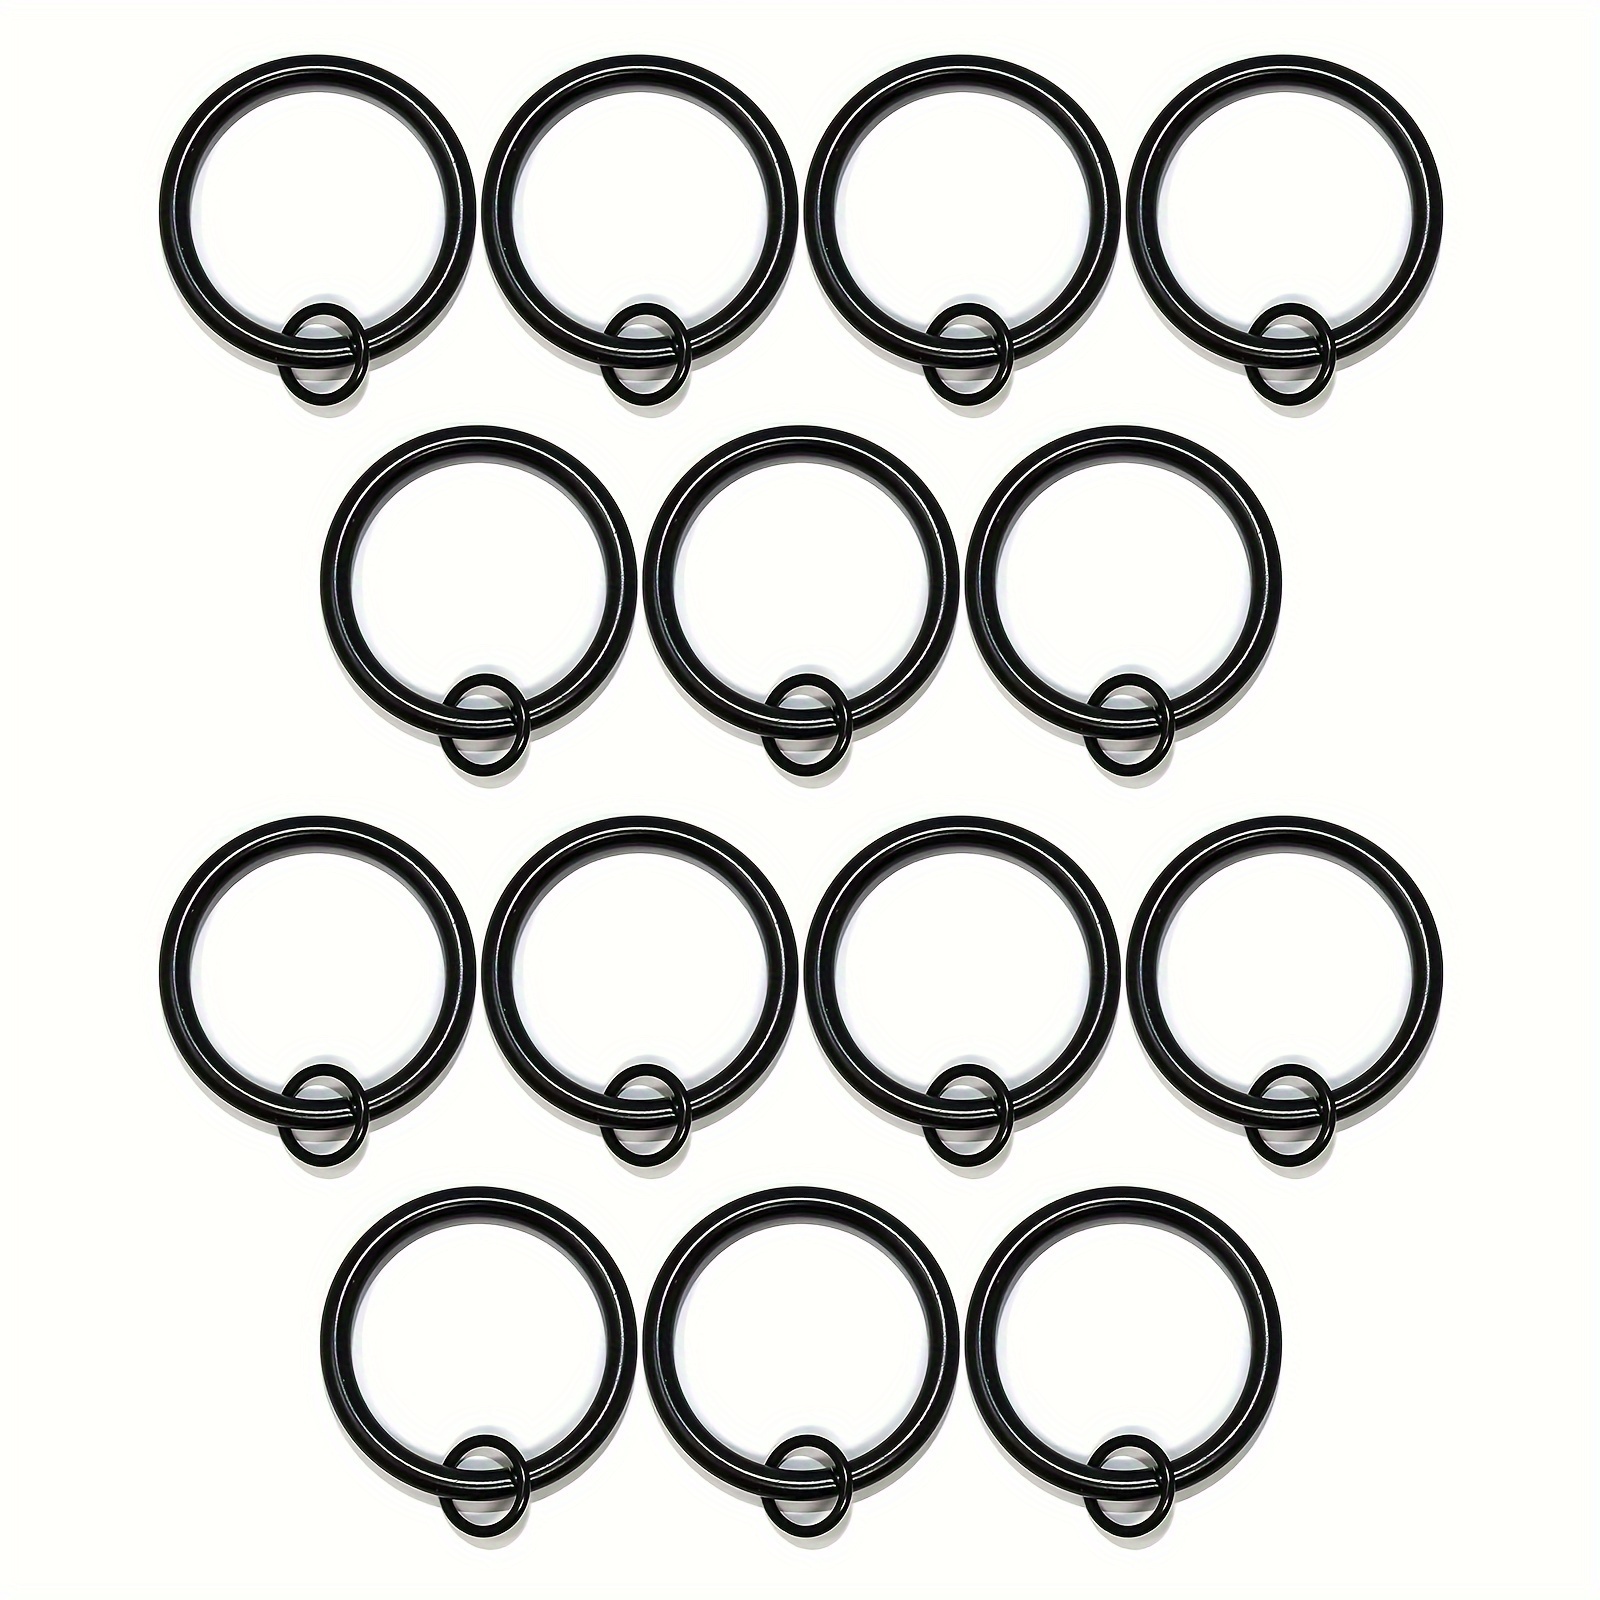 

Solid Metal Window Drapery Curtain Panel Ring With Eyelet, 1.5" Inner Diameter, Fits Up To 1.25" Rod, Set Of 14